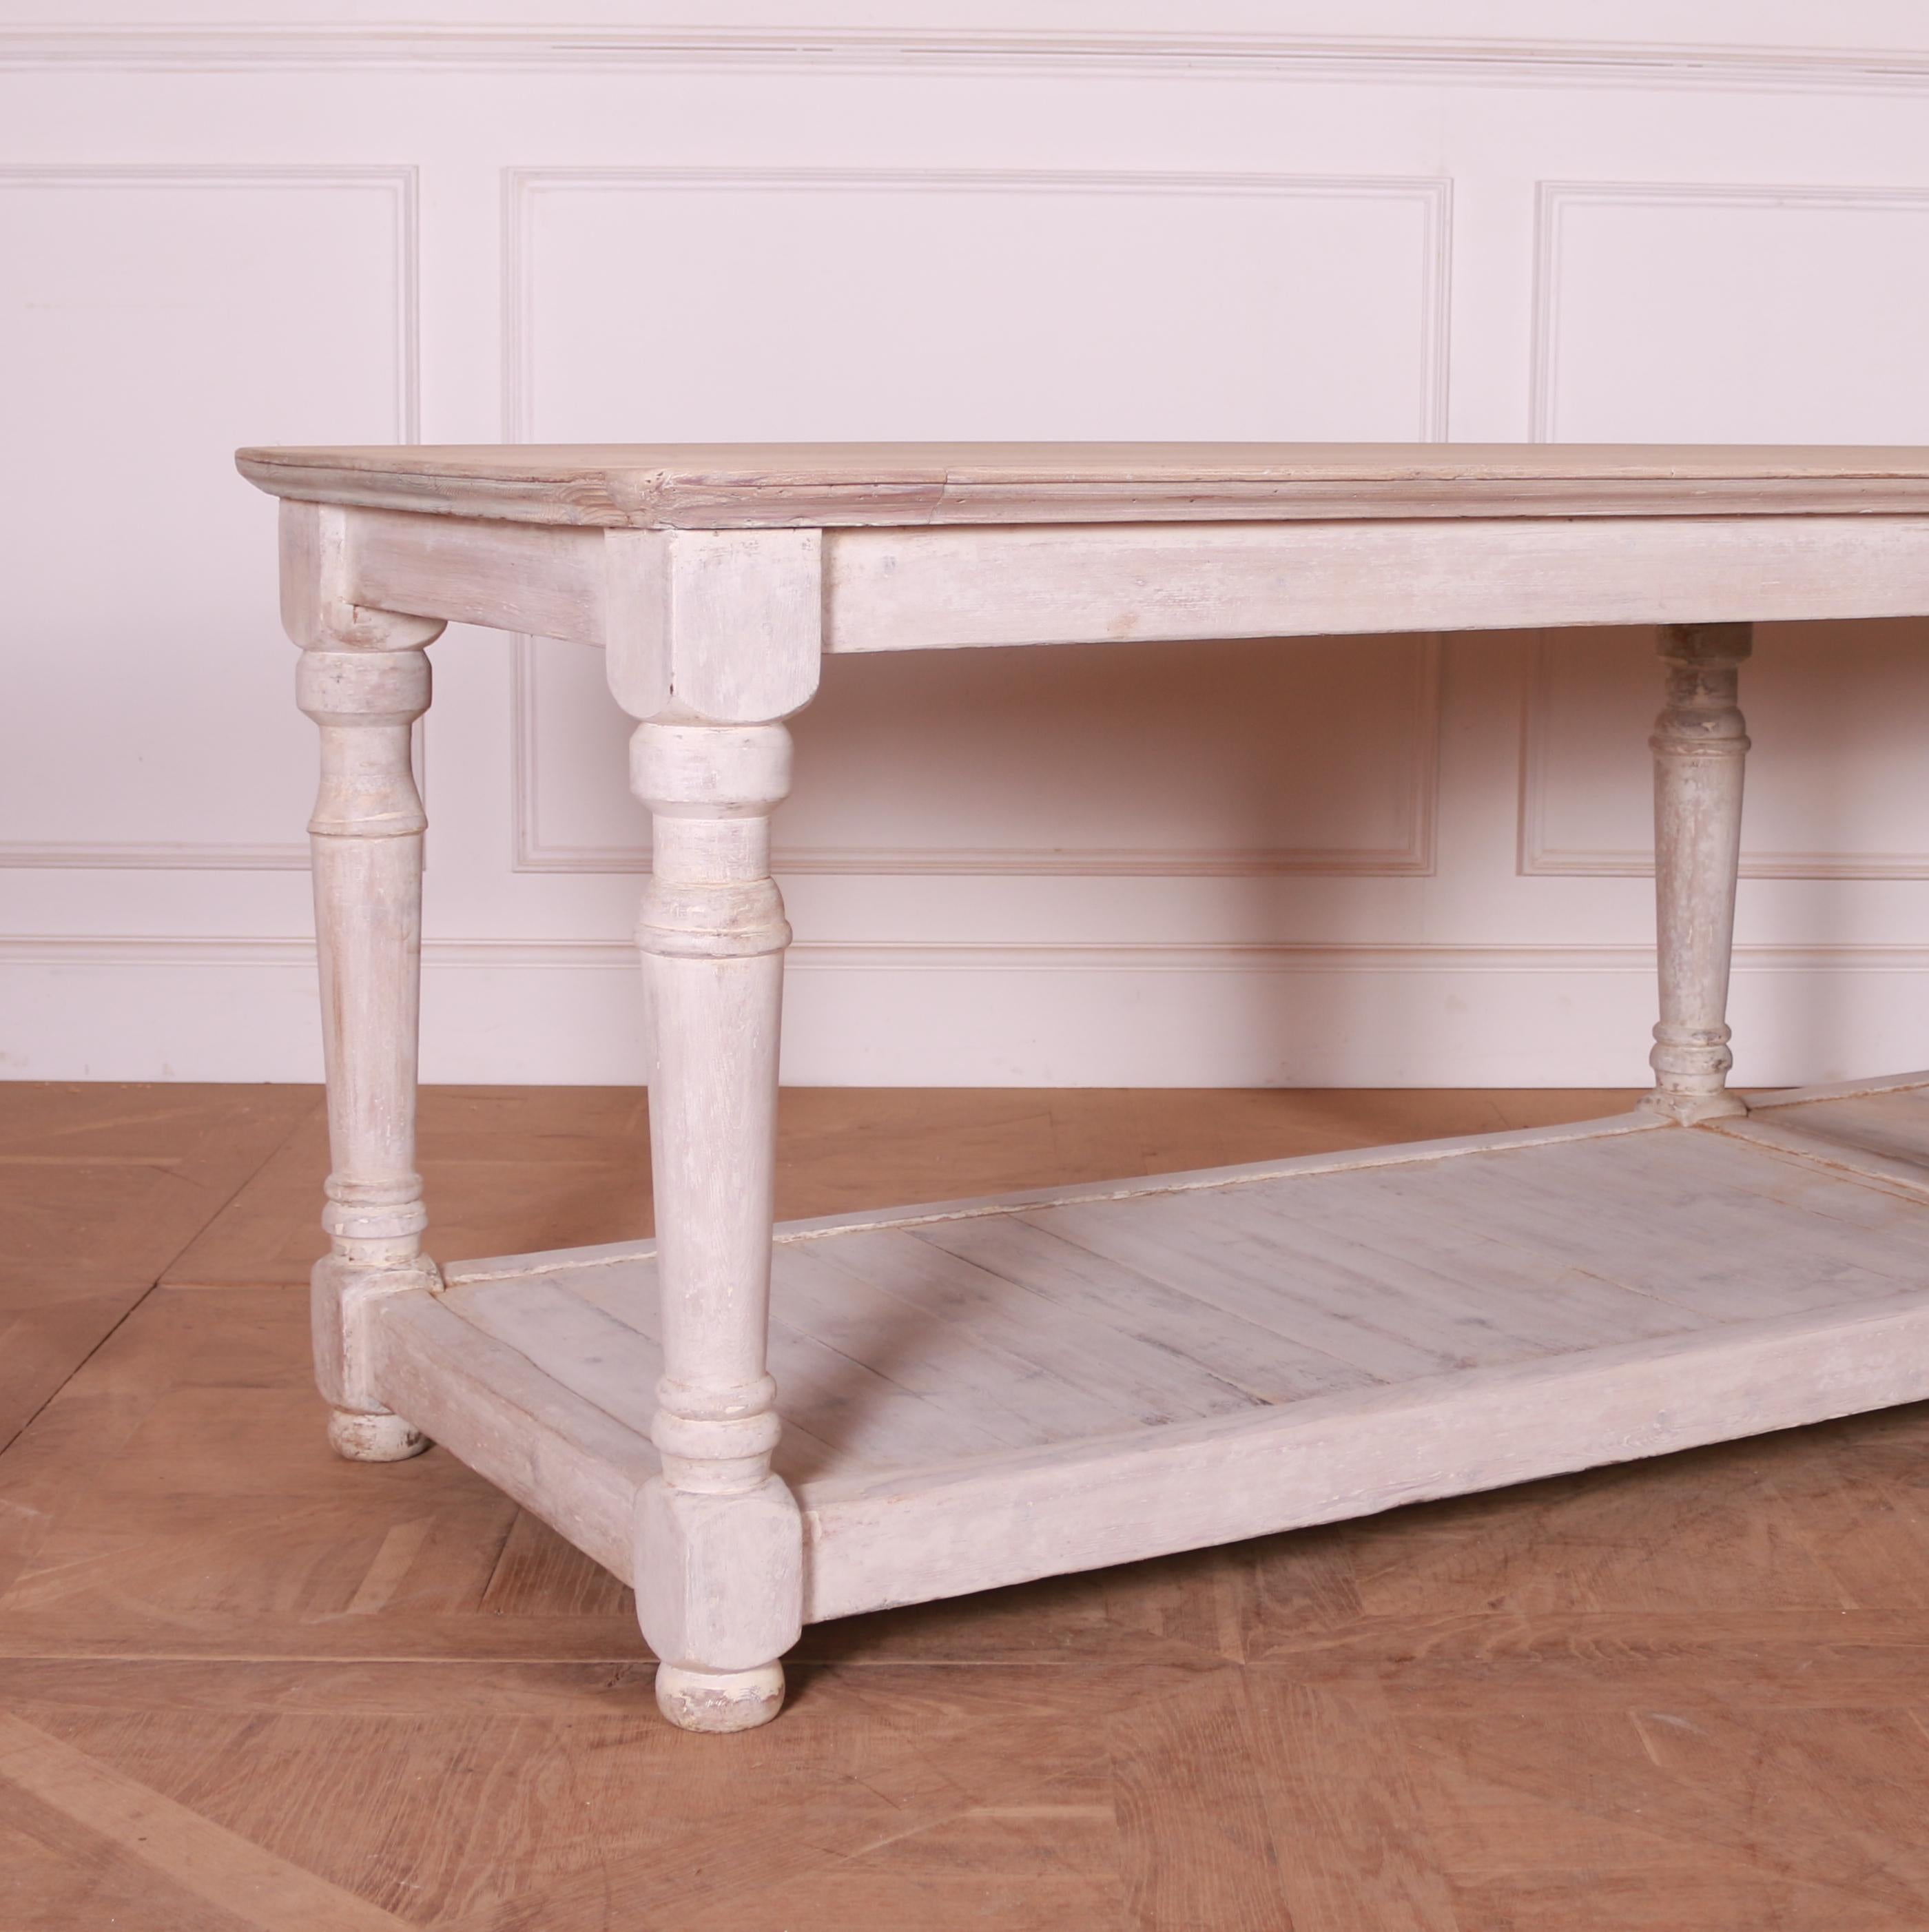 Large 19th C French painted and scrubbed pine drapers table. 1880.

Reference: 7704

Dimensions
108.5 inches (276 cms) wide
29.5 inches (75 cms) deep
30 inches (76 cms) high

